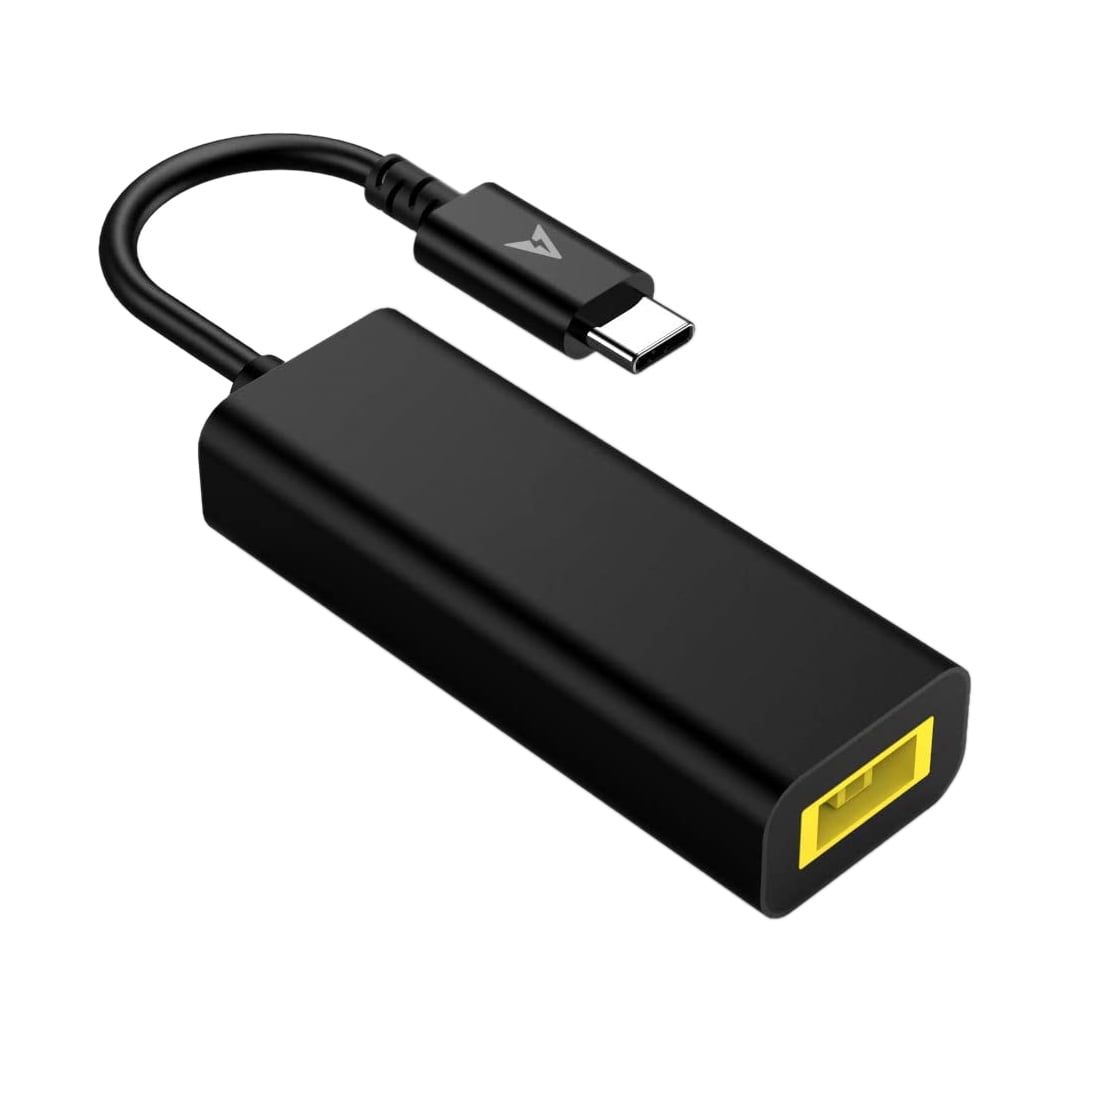 Initiativ Busk marmelade Growment USB C to Slim Tip Adapter Square 45W Convert Charger to Type C for Lenovo  Thinkpad, Samsung S8/S9/Note, Surface - Walmart.com